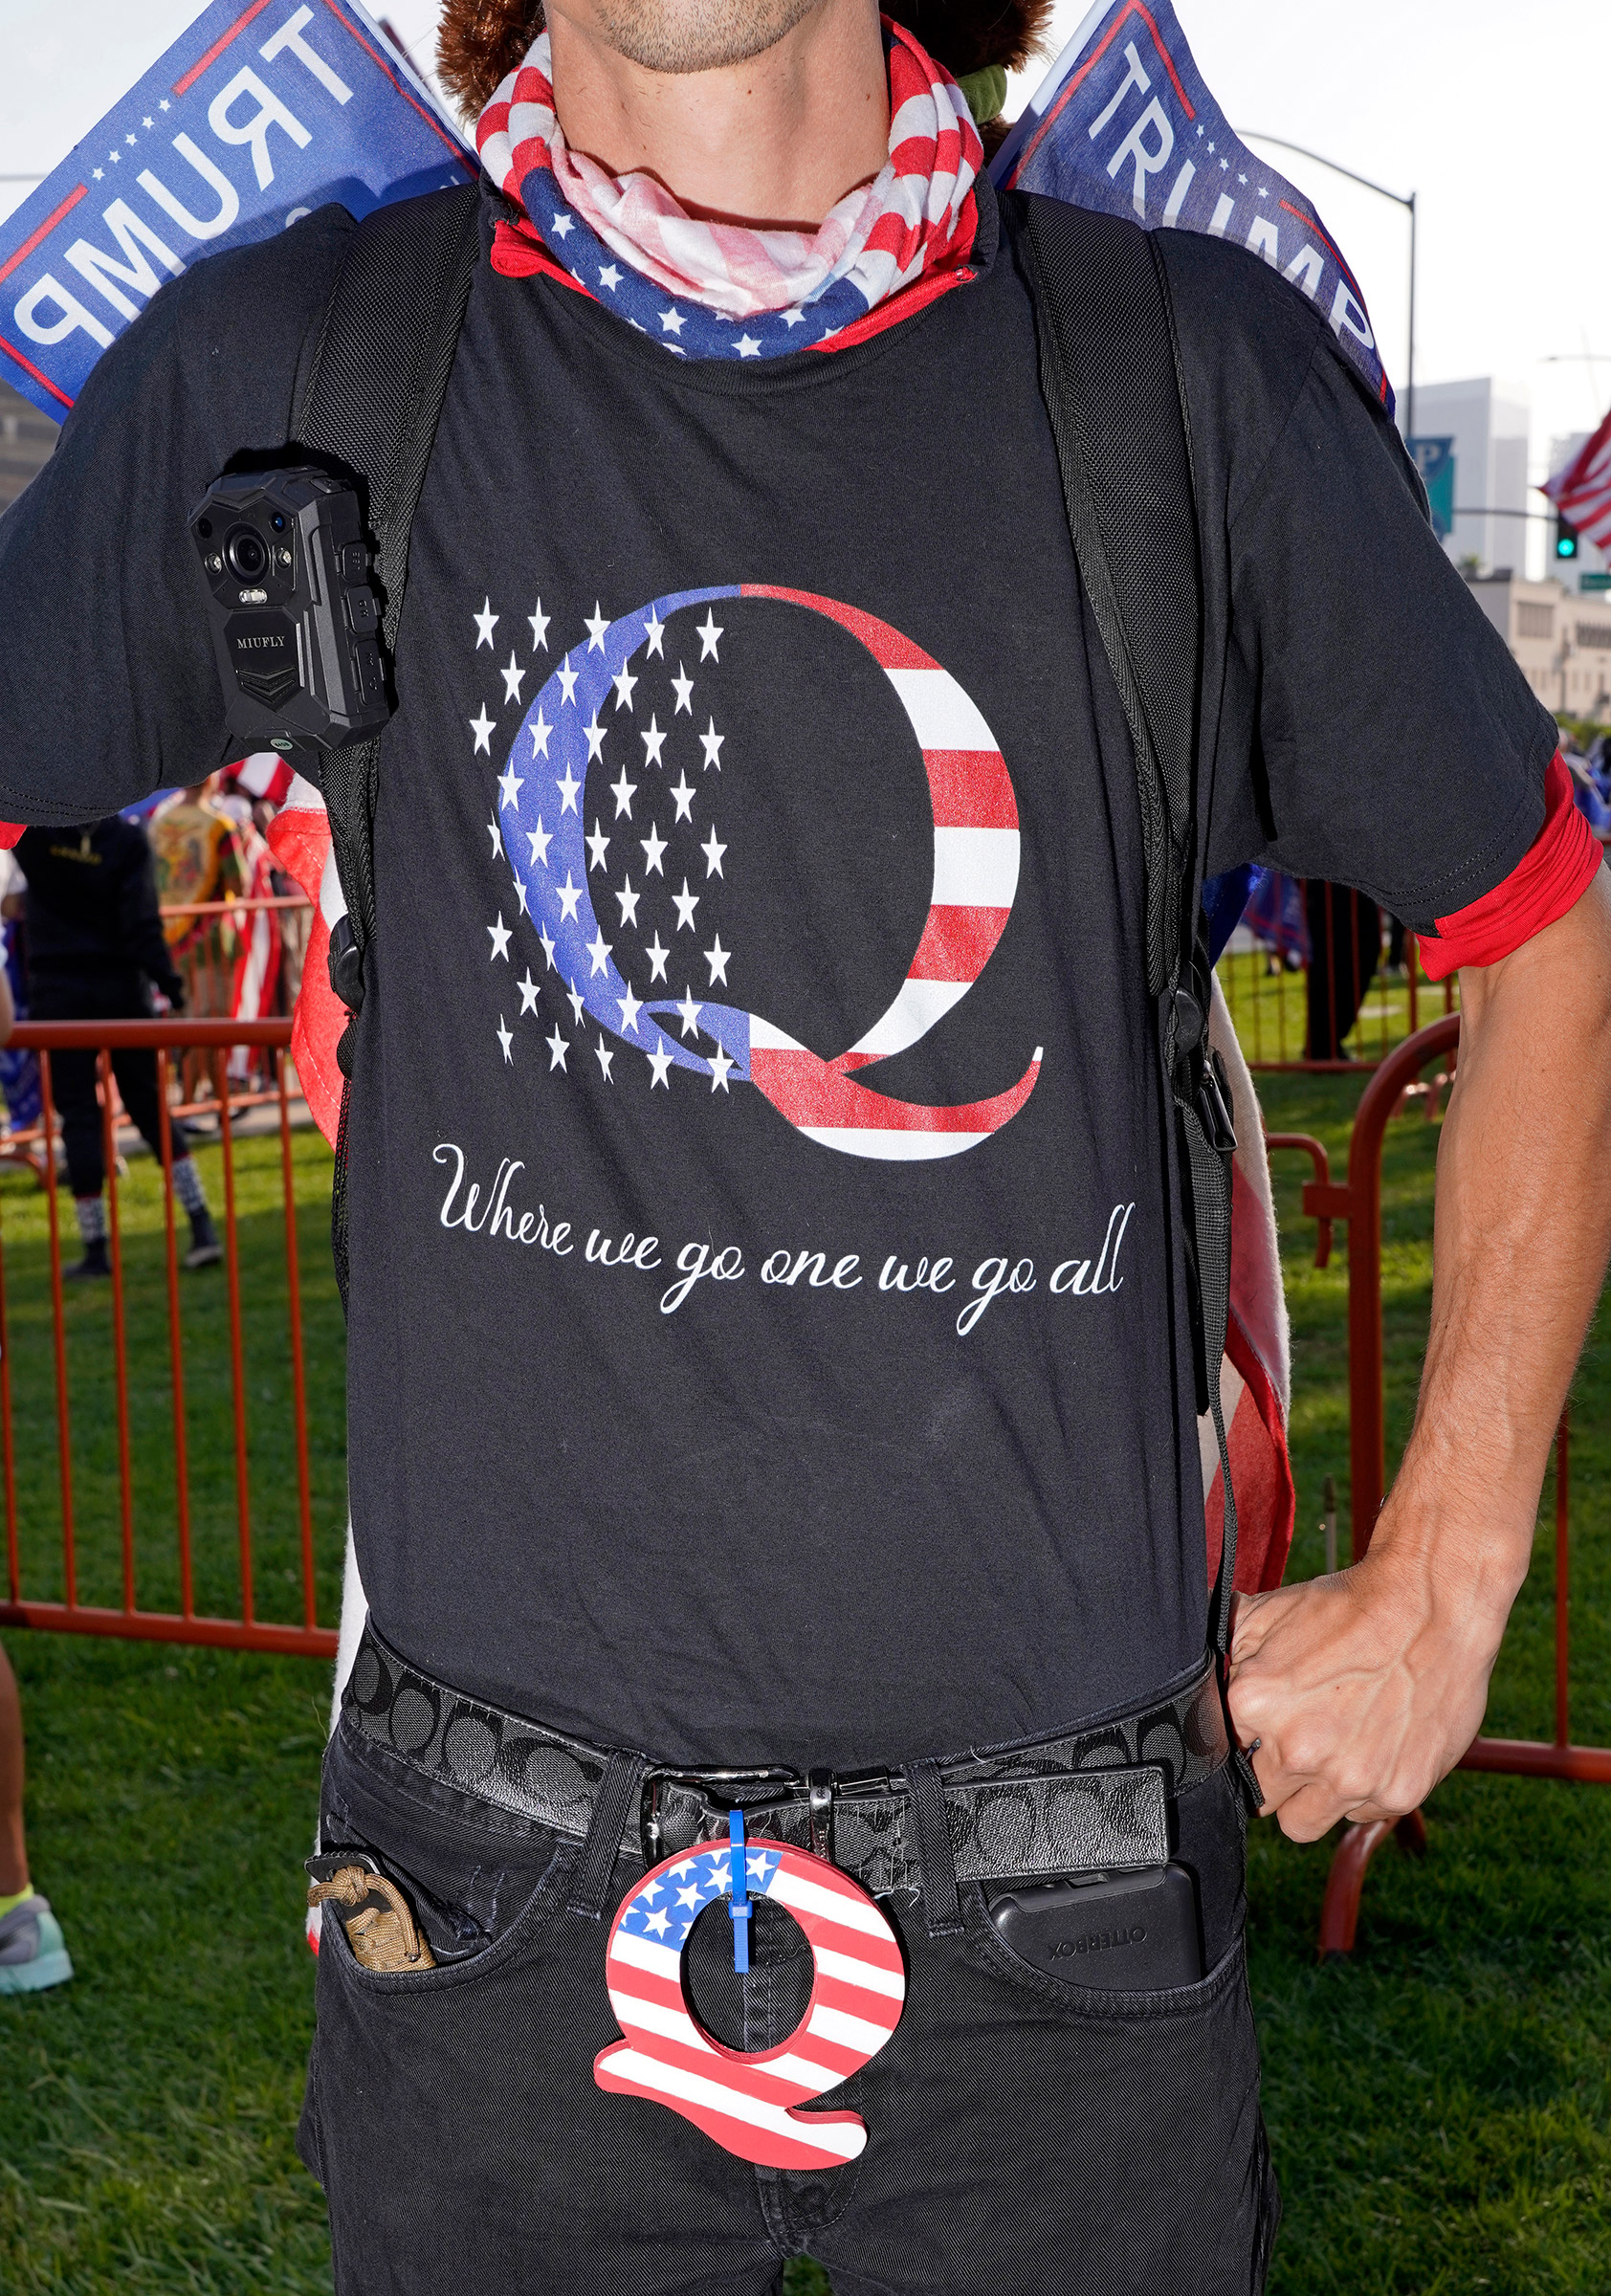 A QAnon shirt at a Trump rally in Beverly Hills, Calif., Oct. 10, 2020. (Jamie Lee Curtis Taete)